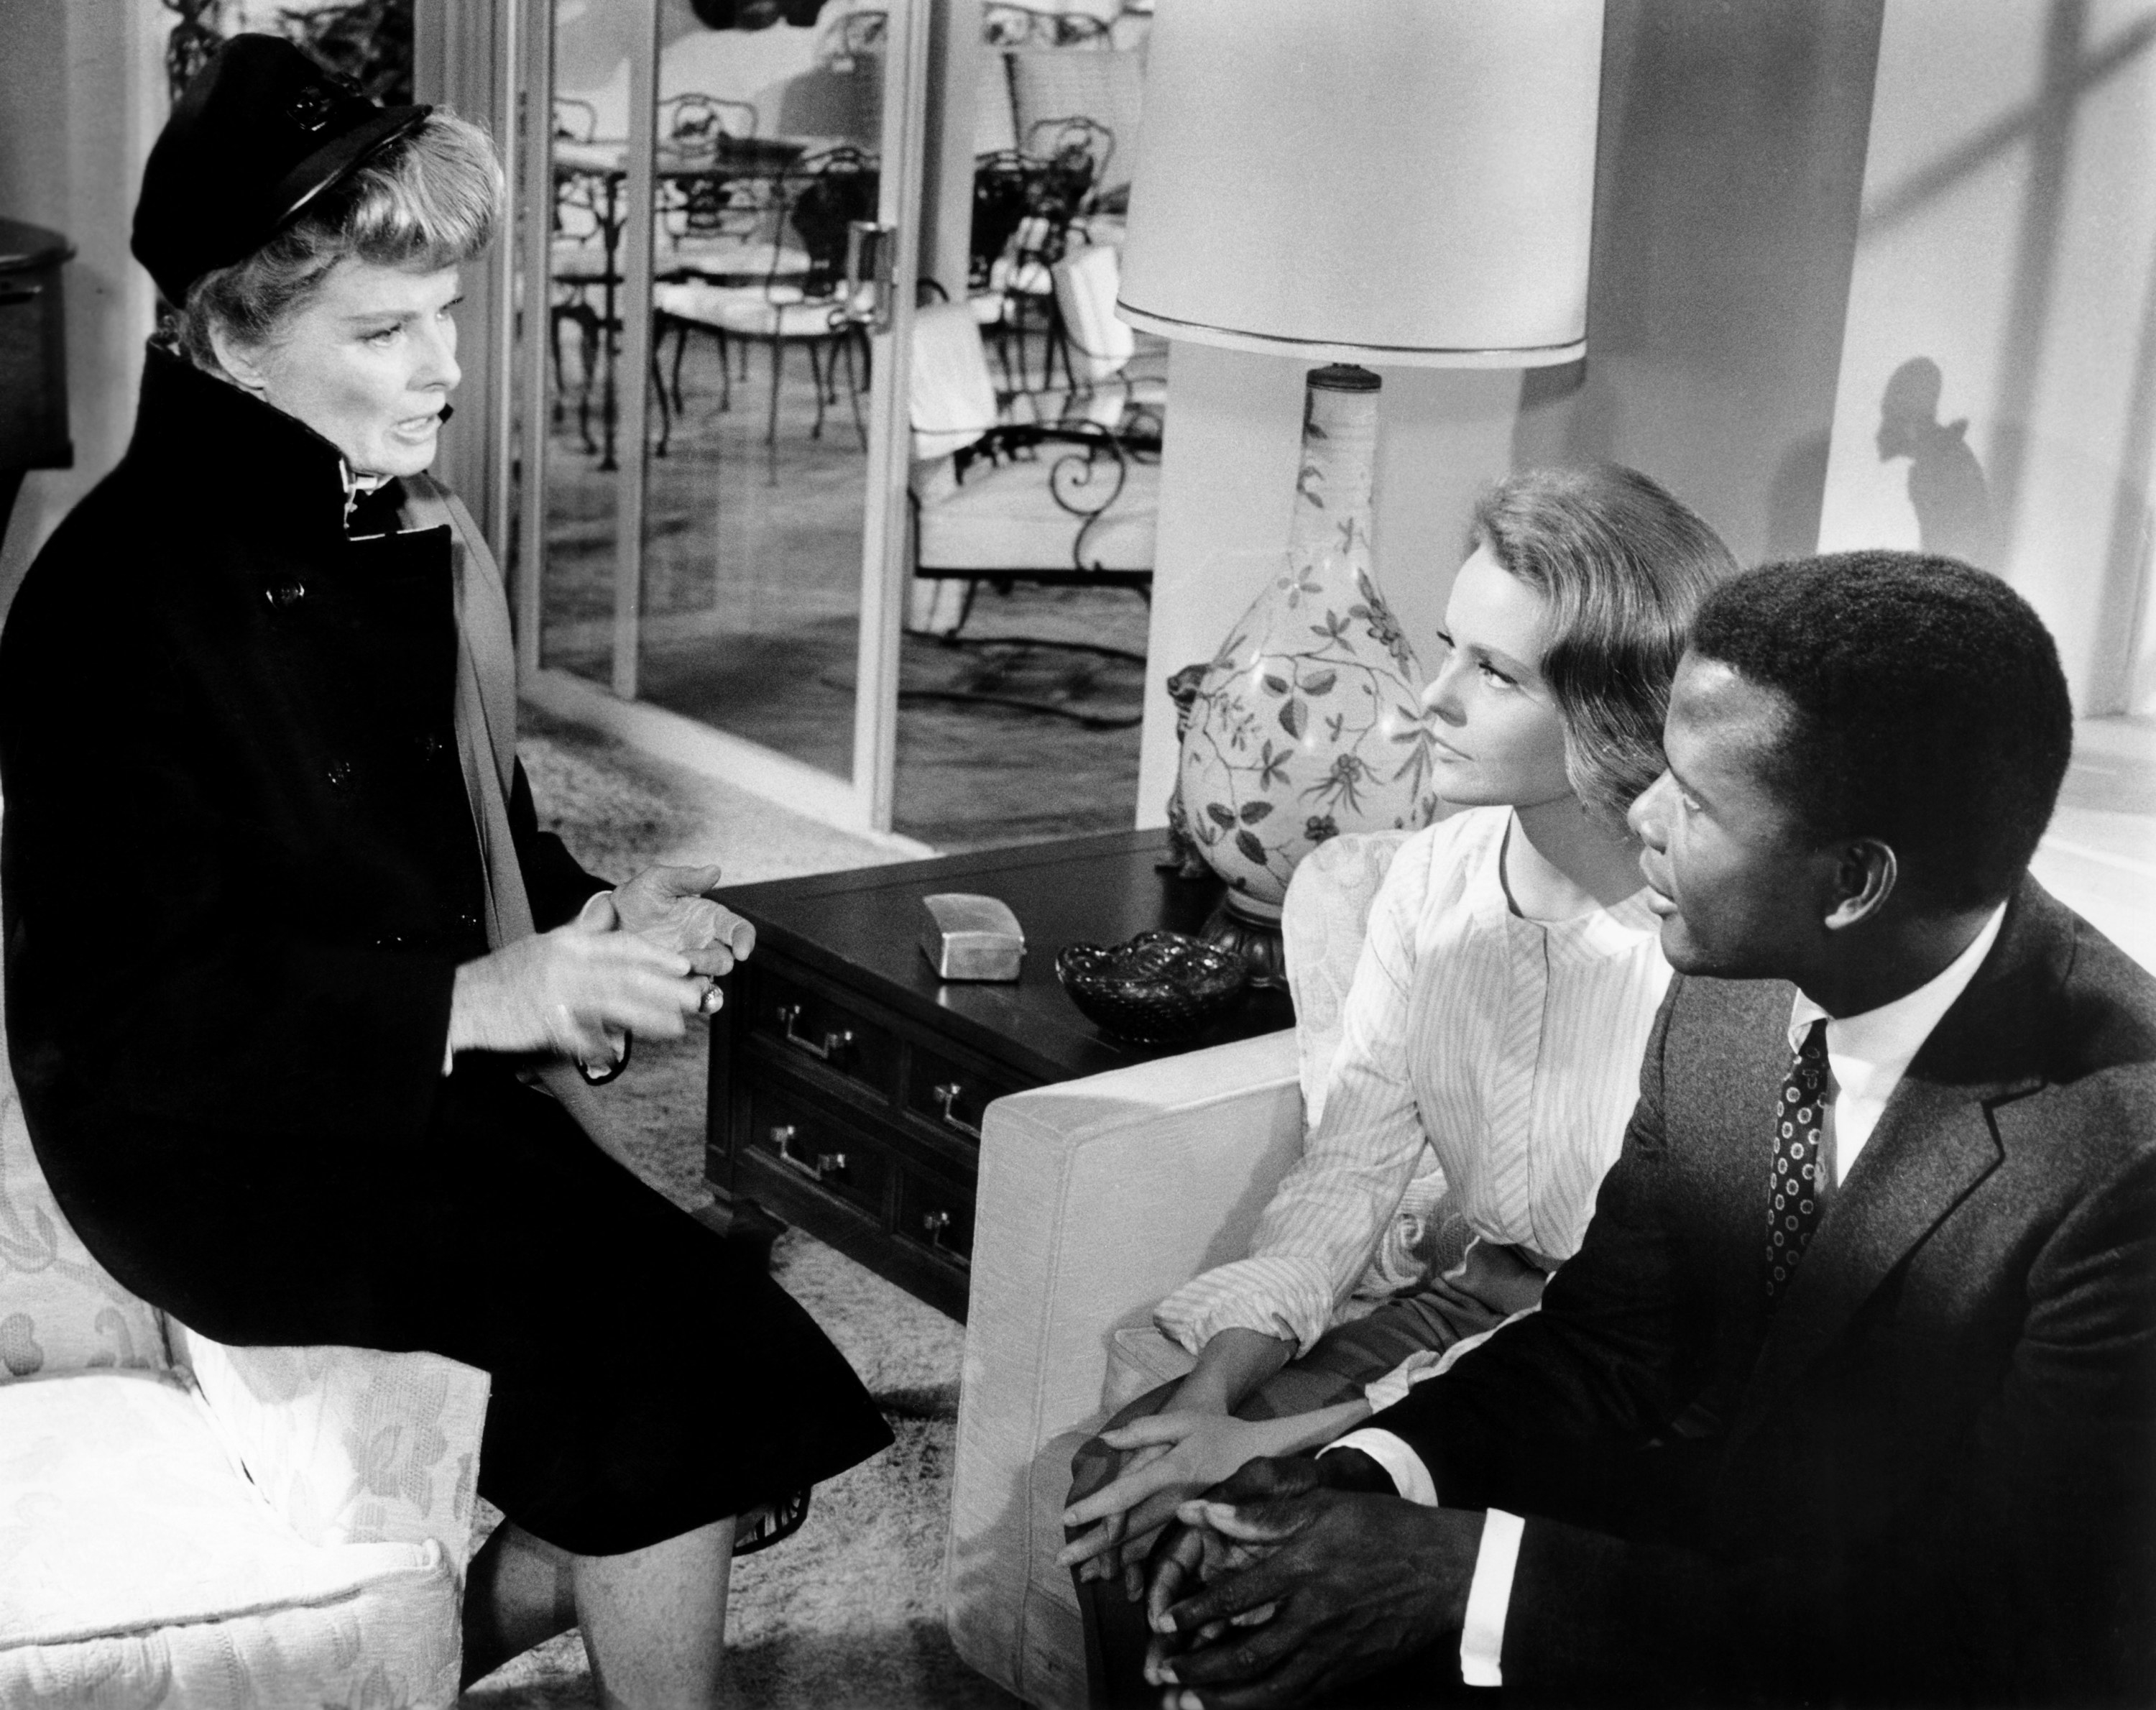 Katharine Hepburn sits on a chair talking to Katharine Houghton and Sidney Poitier on a couch